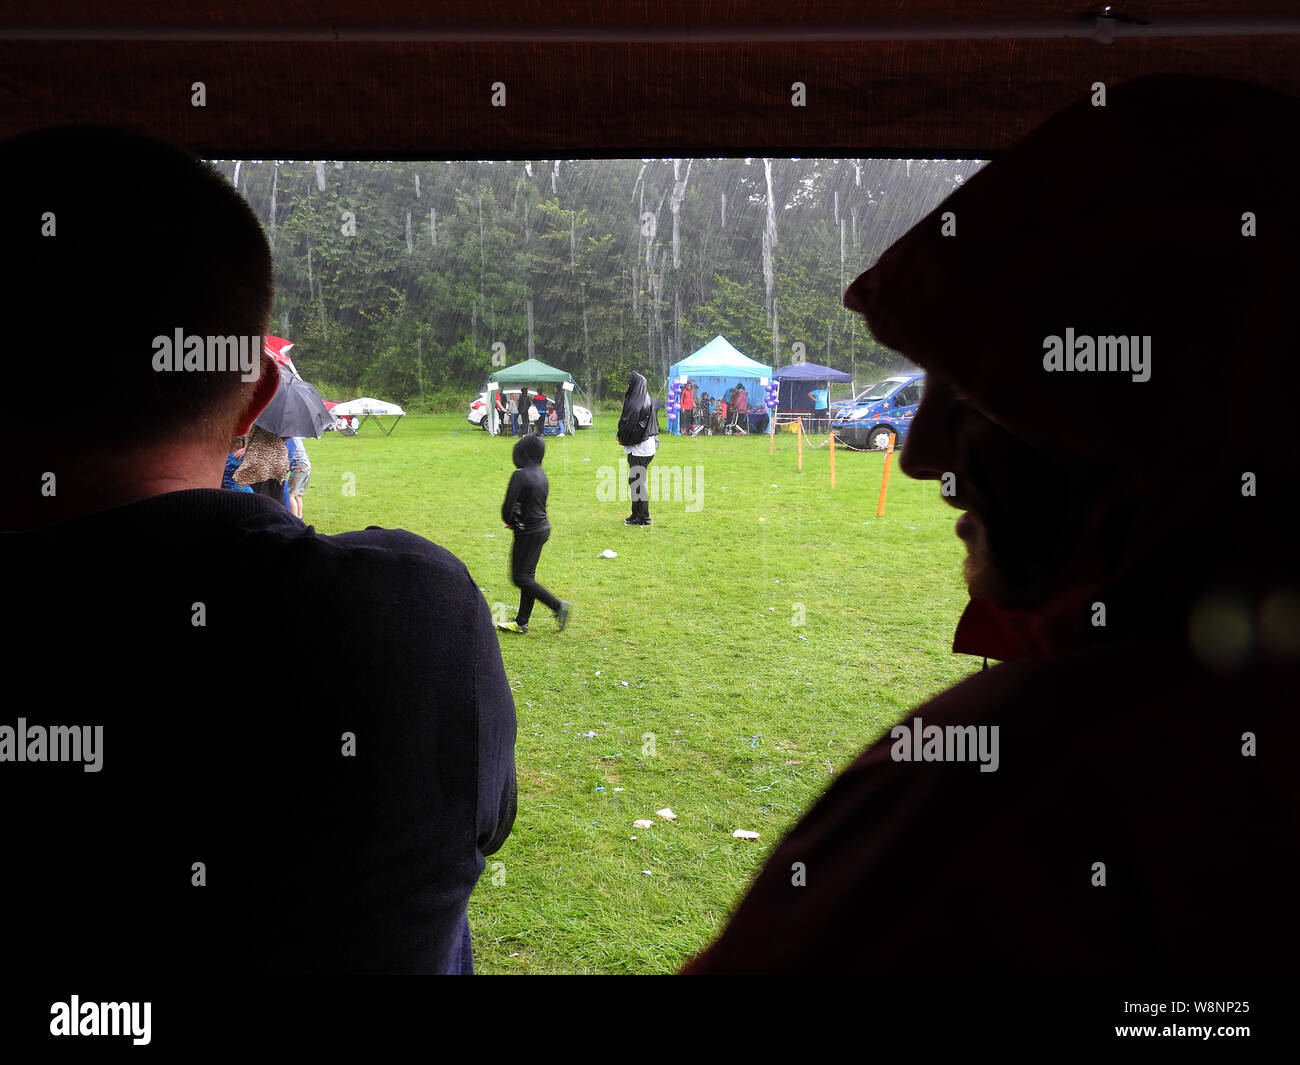 Annual Event rained off - A lone figure refuses to be dissuaded from watching a stage event at a festival as  all other onlookers rush for shelter from a torrential downpour Stock Photo